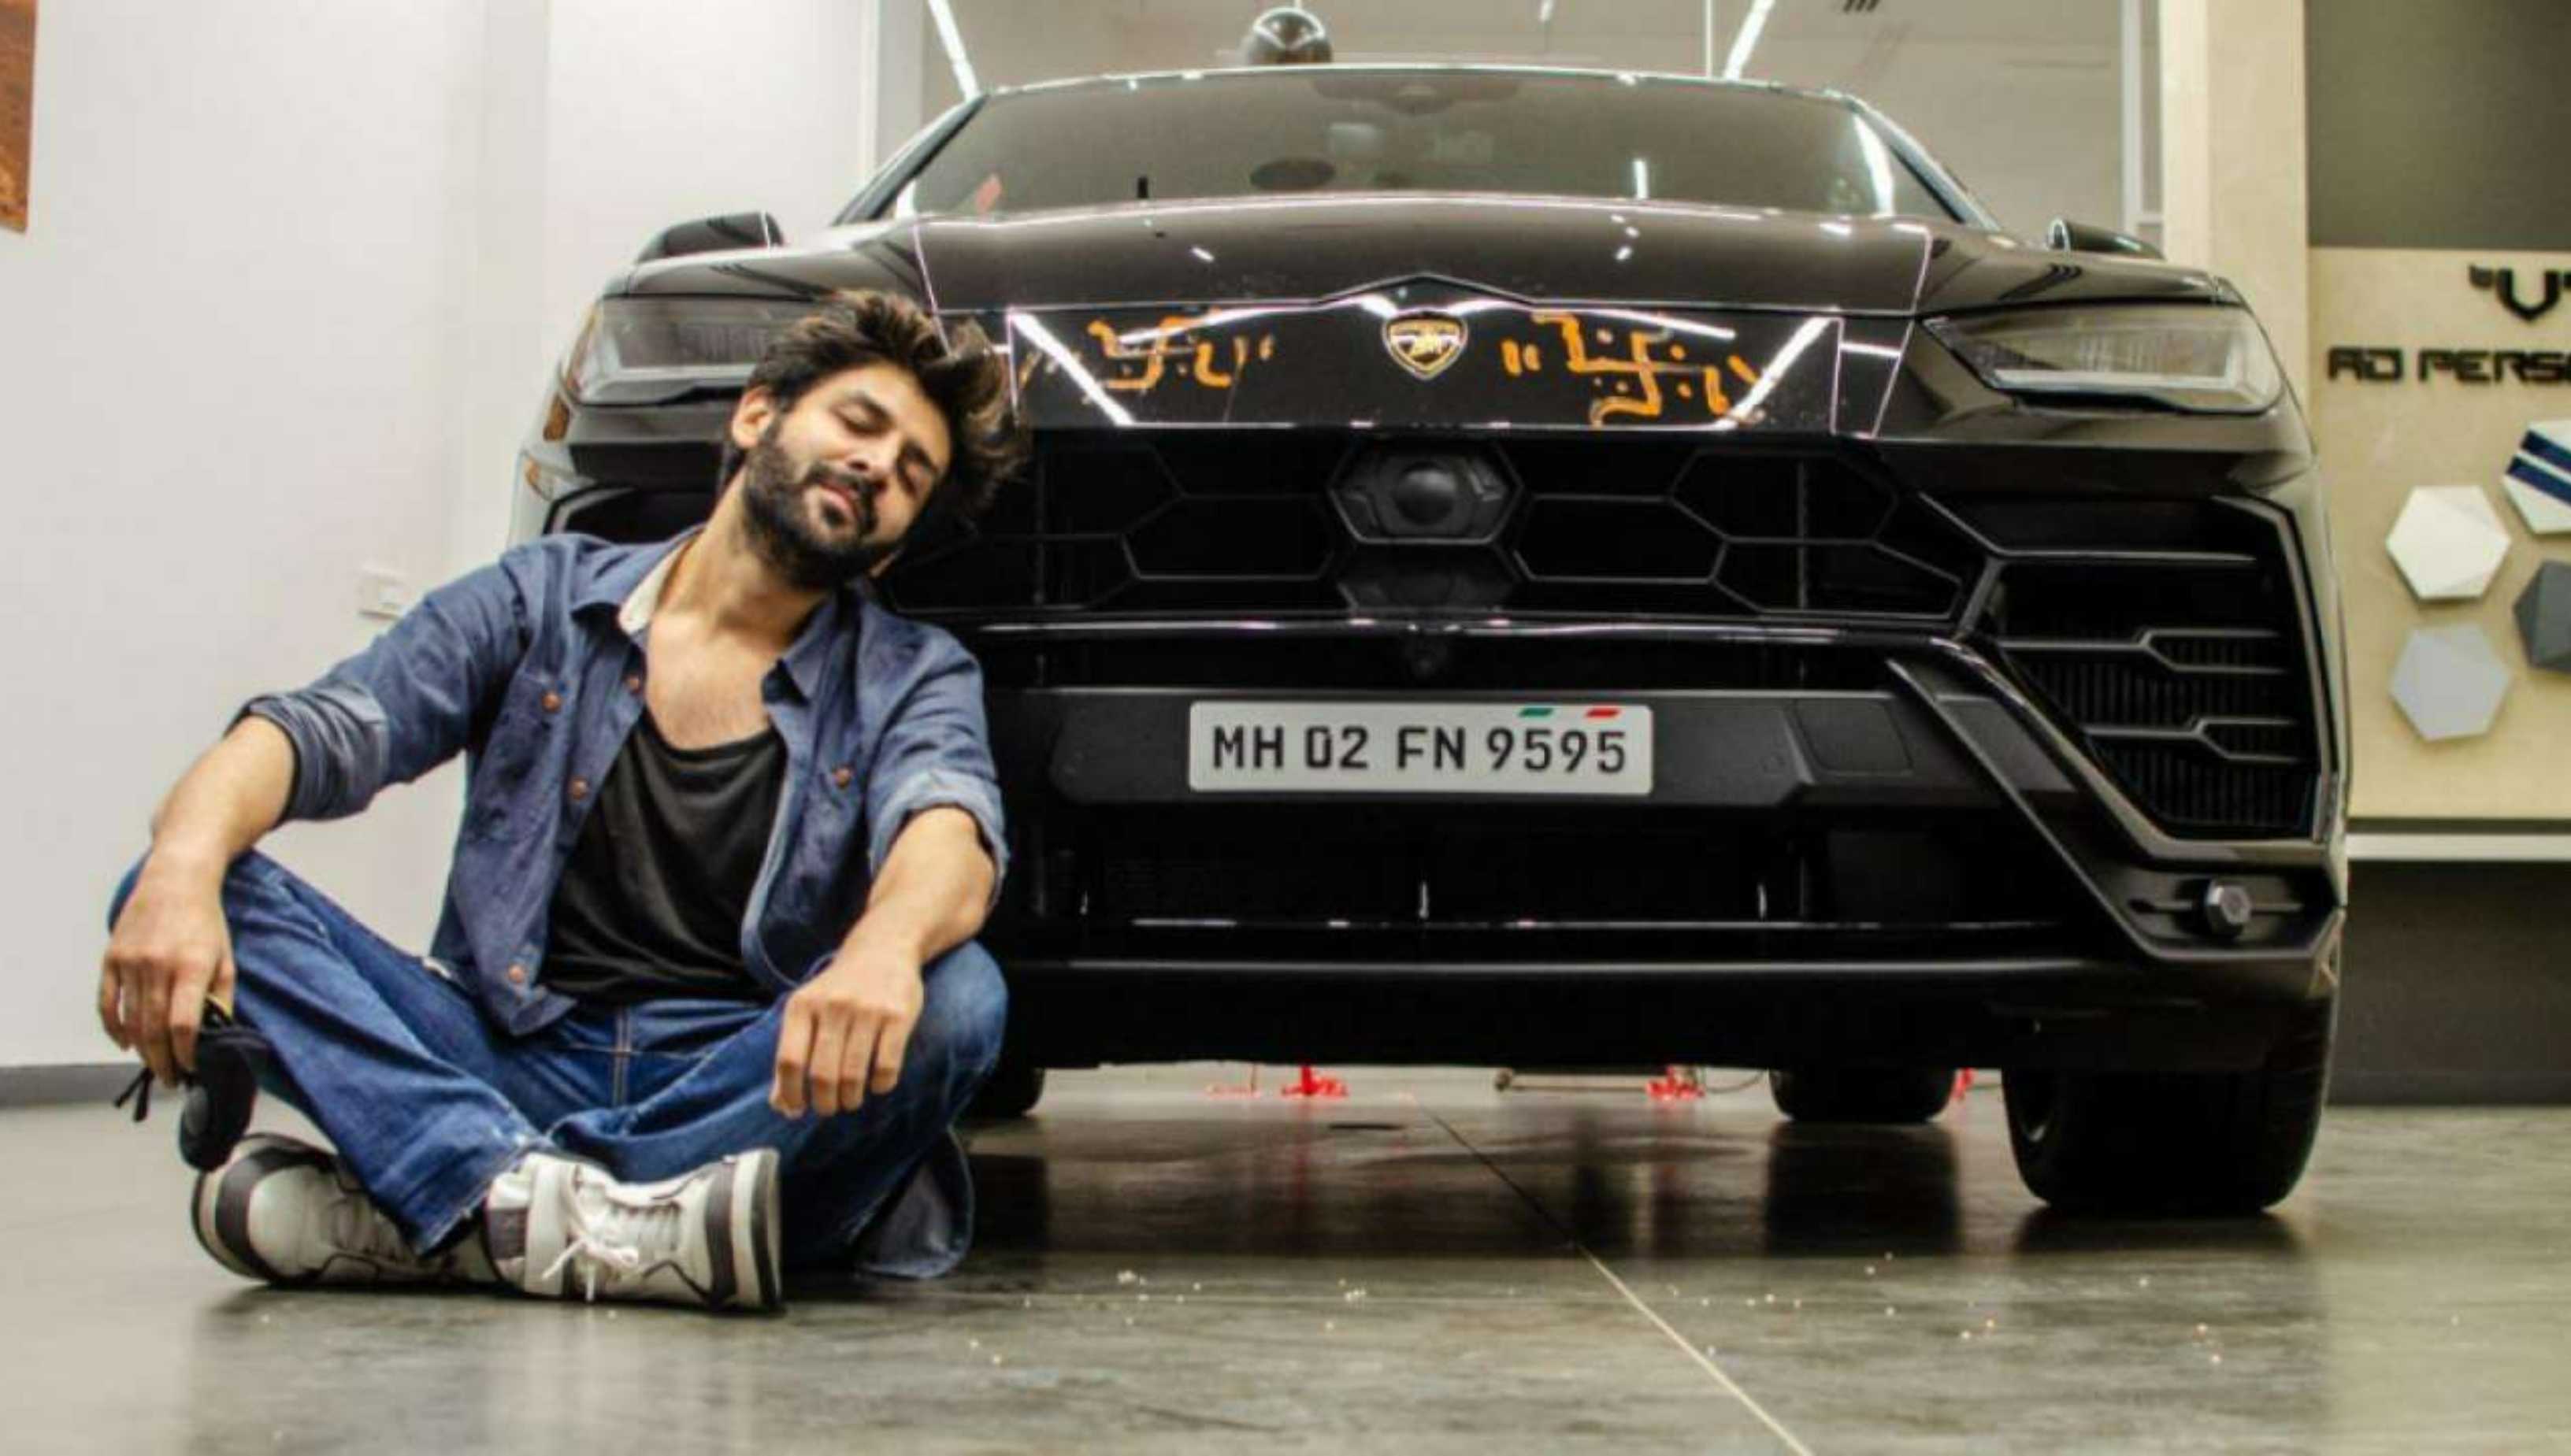 Kartik Aaryan hopes to buy a private jet after his Lamborghini, but explains how he’s still relatable